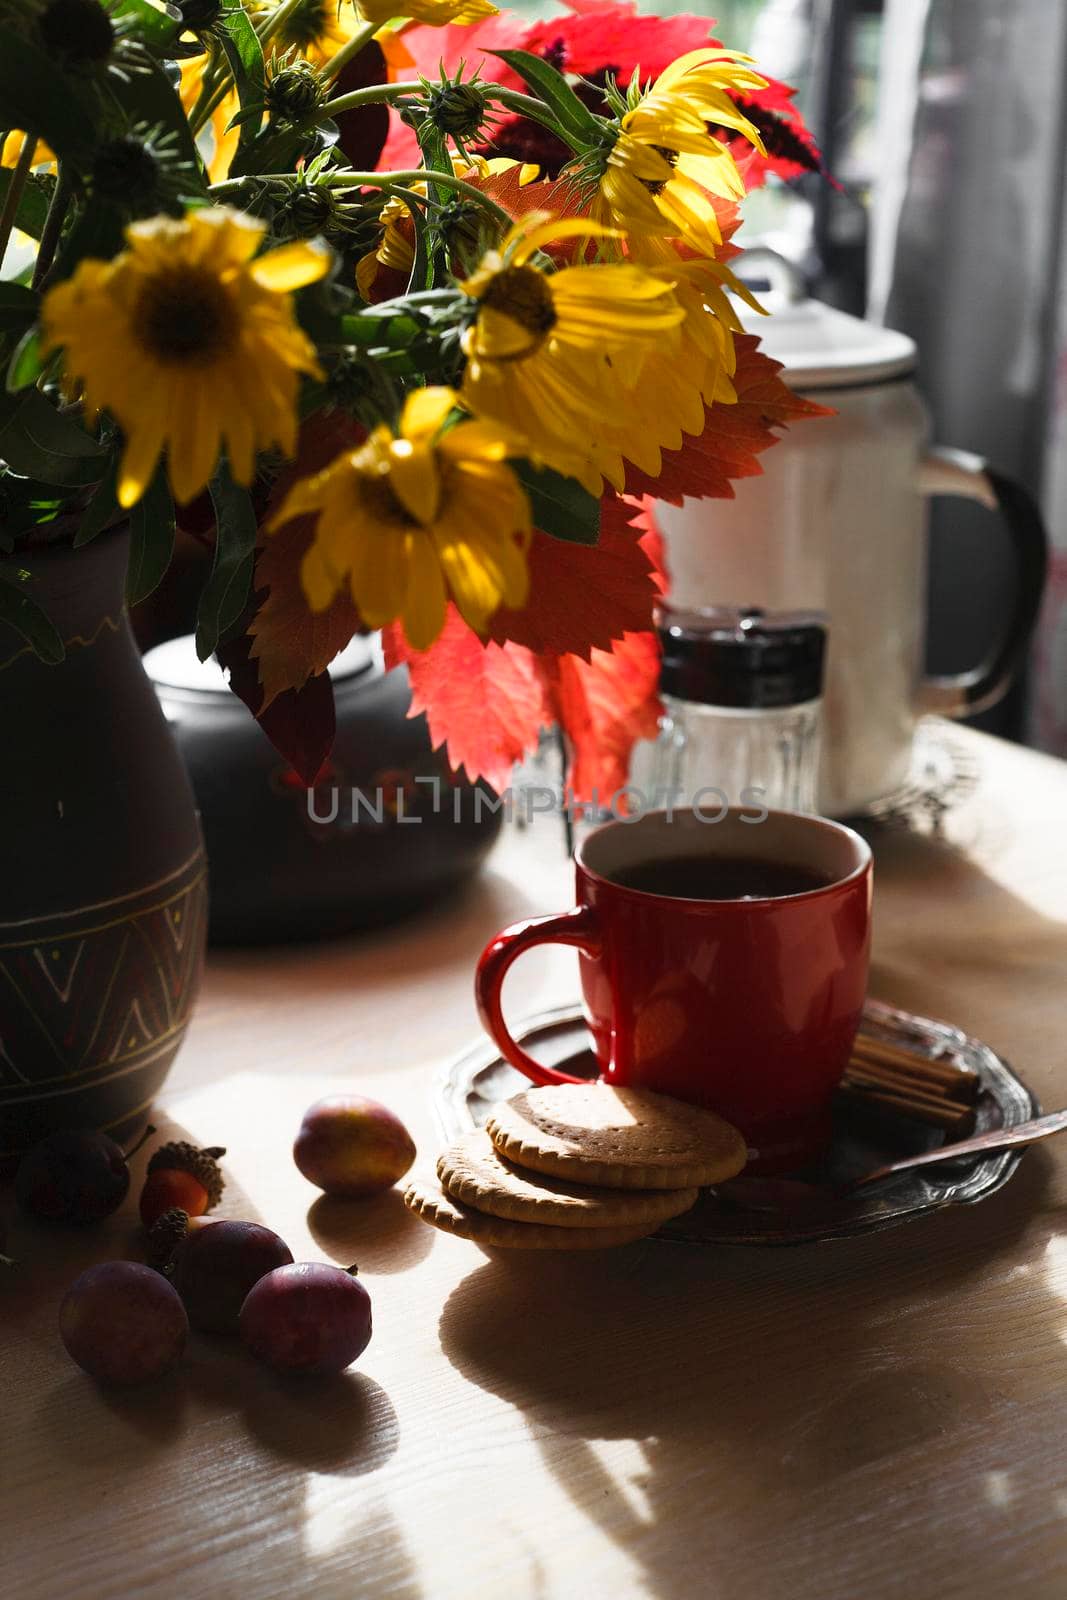 Red cup of tea on metal plate with a bouquet of yellow autumn flowers and colored leaves and plums on white table, early autumn morning concept, selective focus.